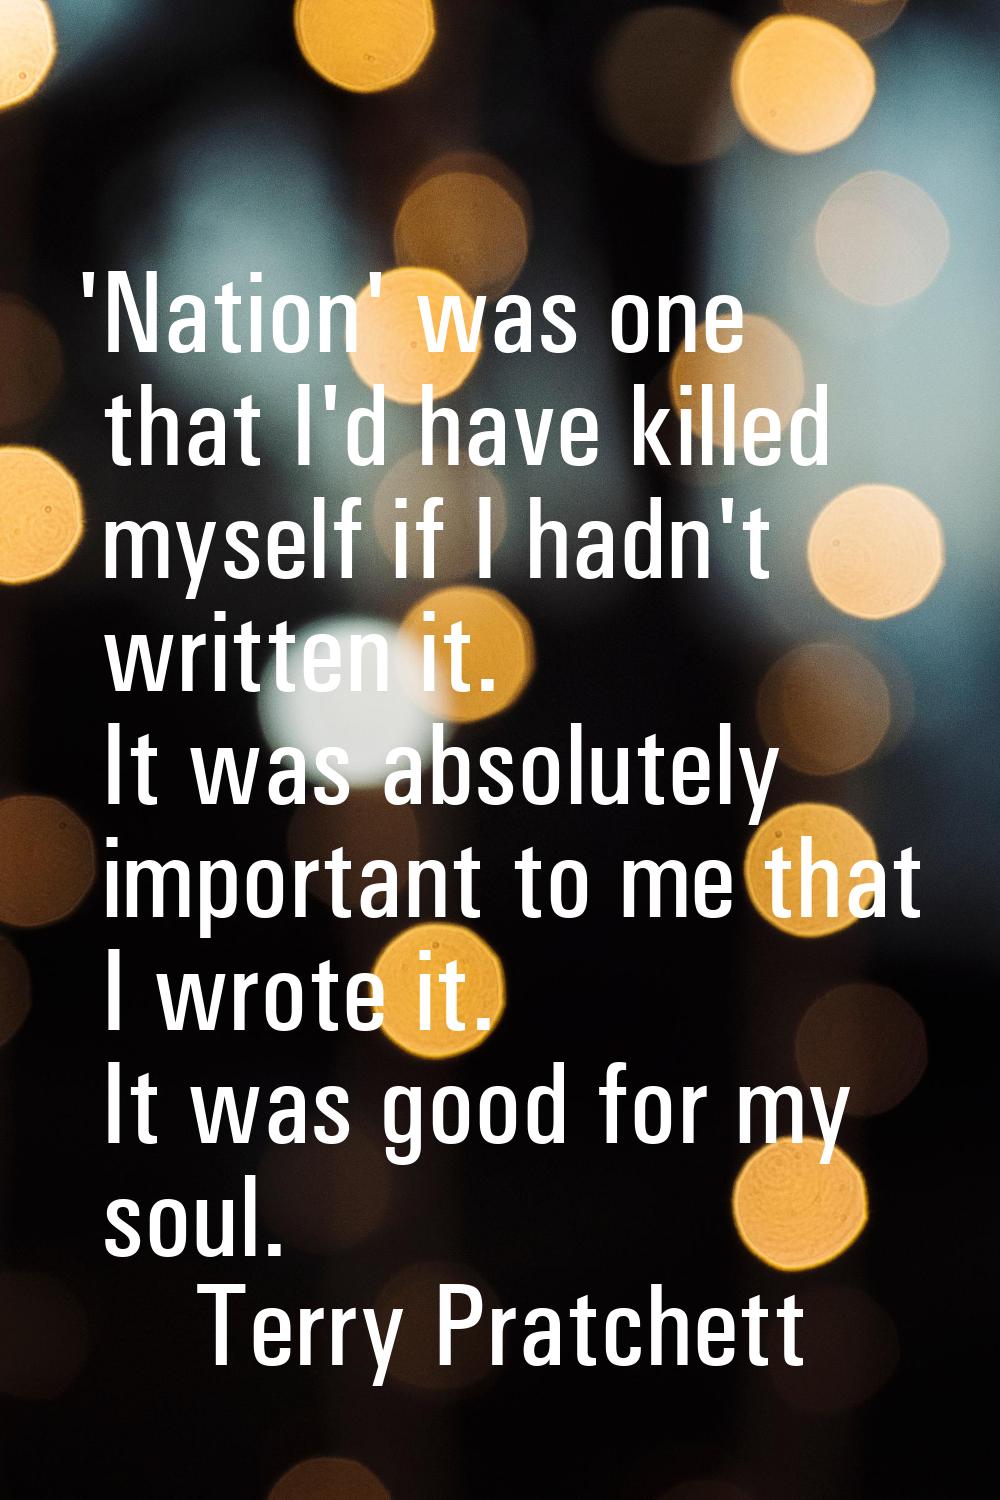 'Nation' was one that I'd have killed myself if I hadn't written it. It was absolutely important to